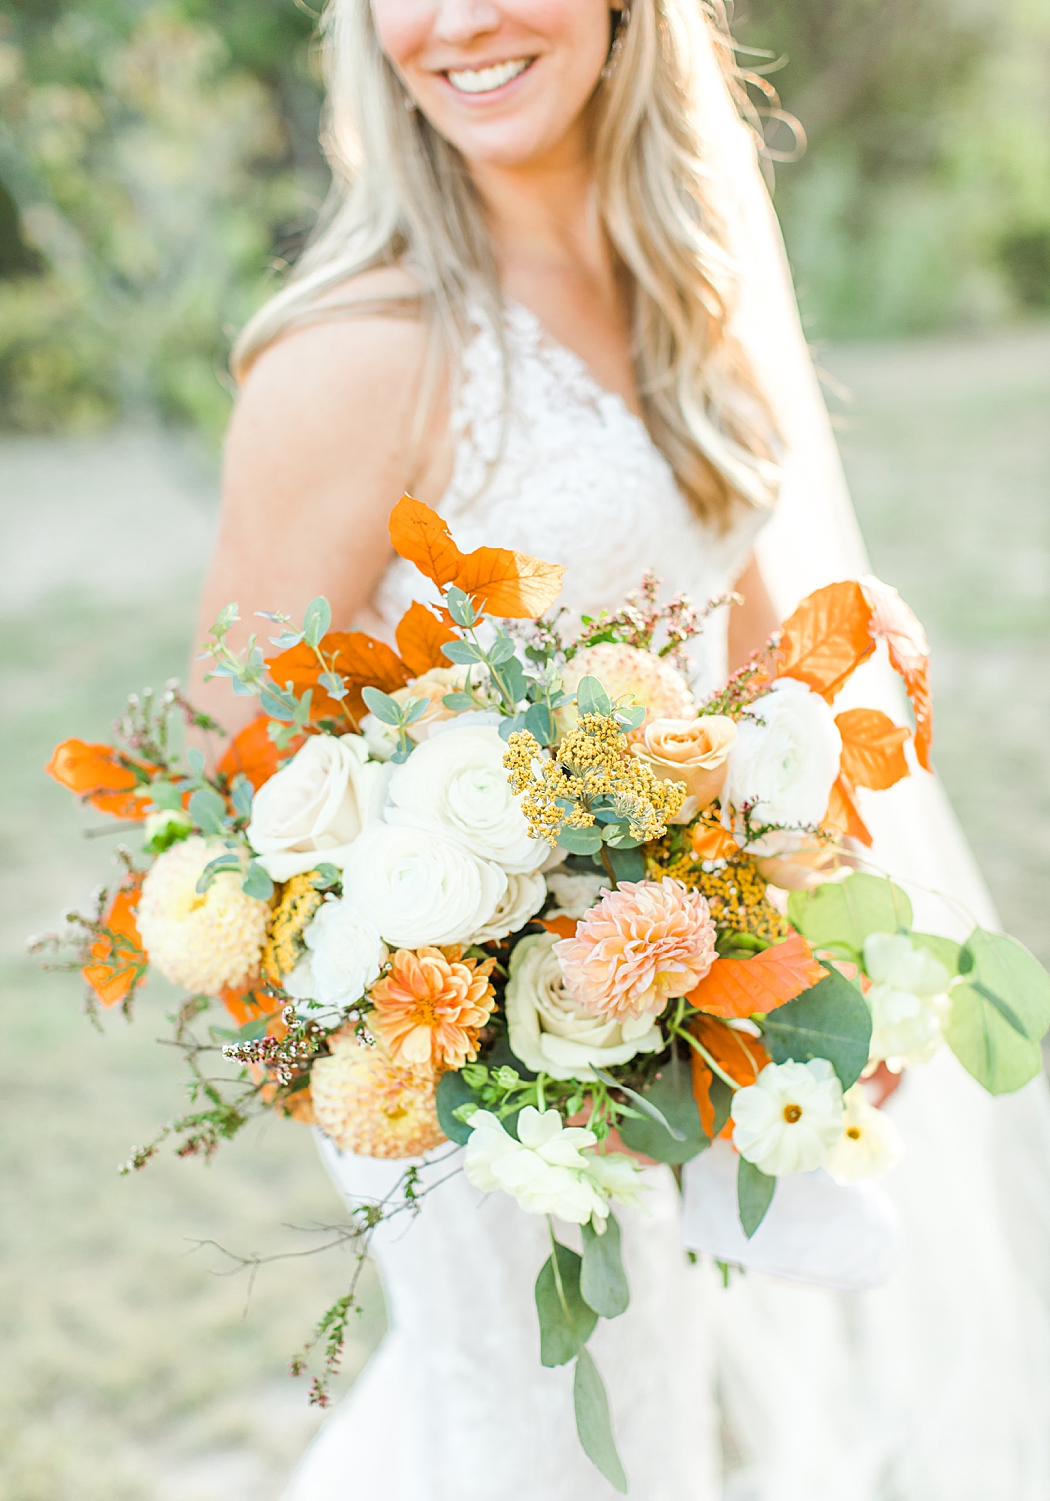 Terra Cotta Fall Micro Wedding in Kerrville Texas at a private estate in the Hill Country by Allison Jeffers Photography 0065